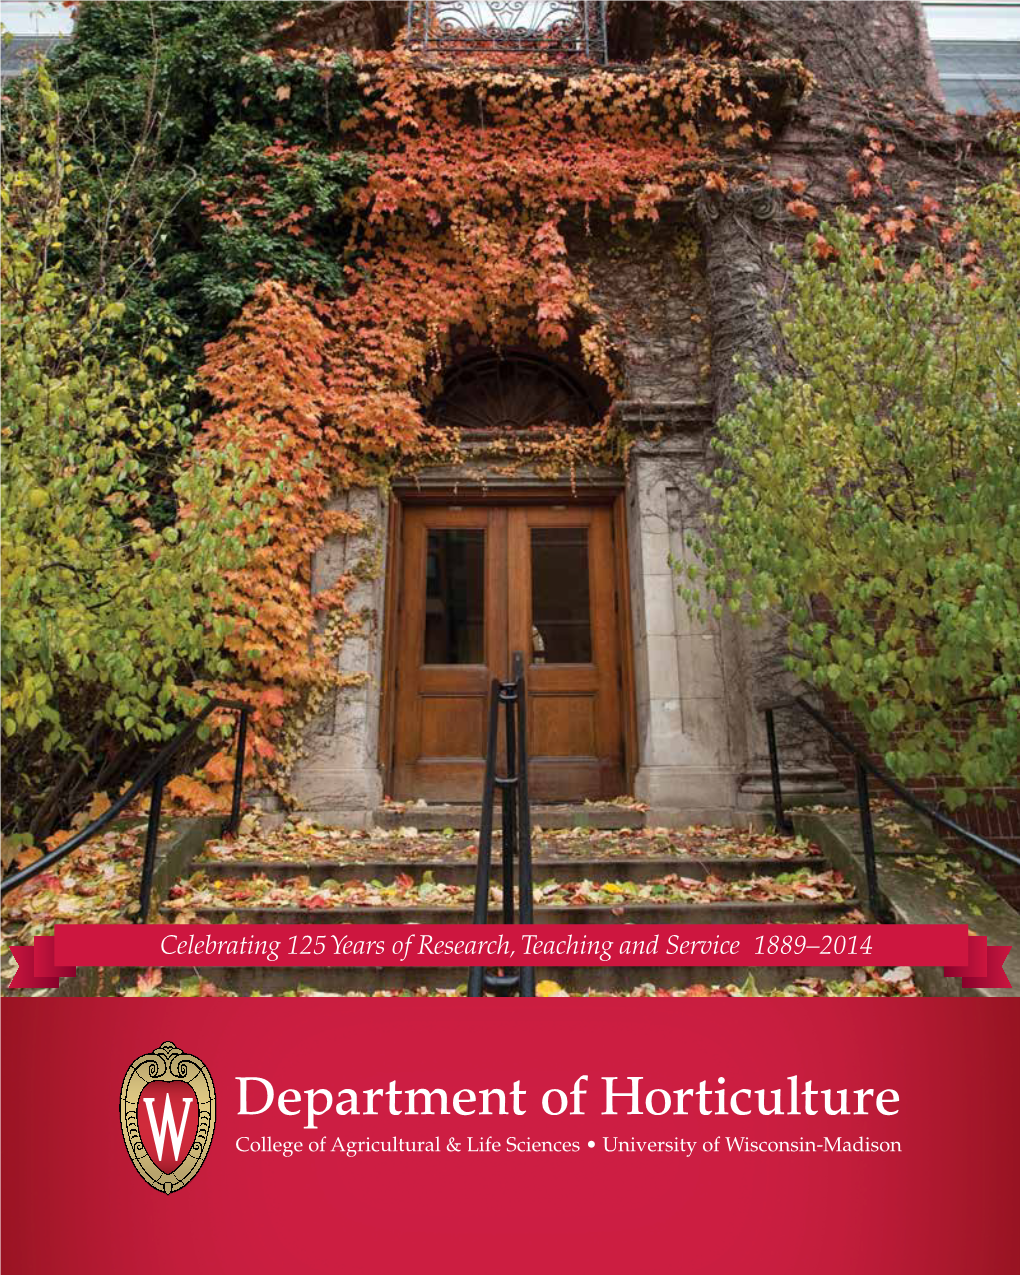 History of the Department of Horticulture Table of Contents